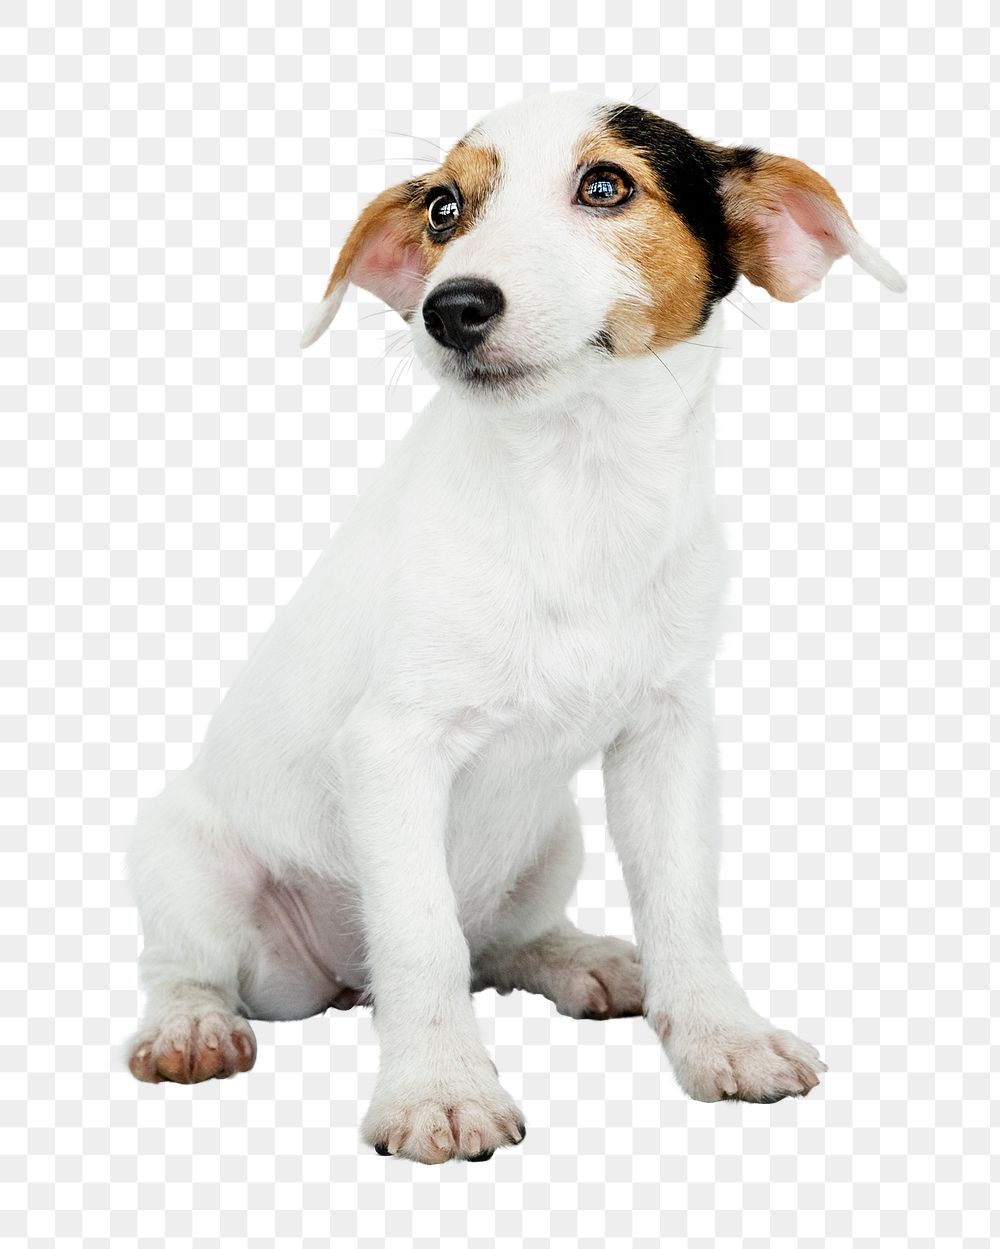 Puppy png sticker, Jack Russell Terrier on transparent background